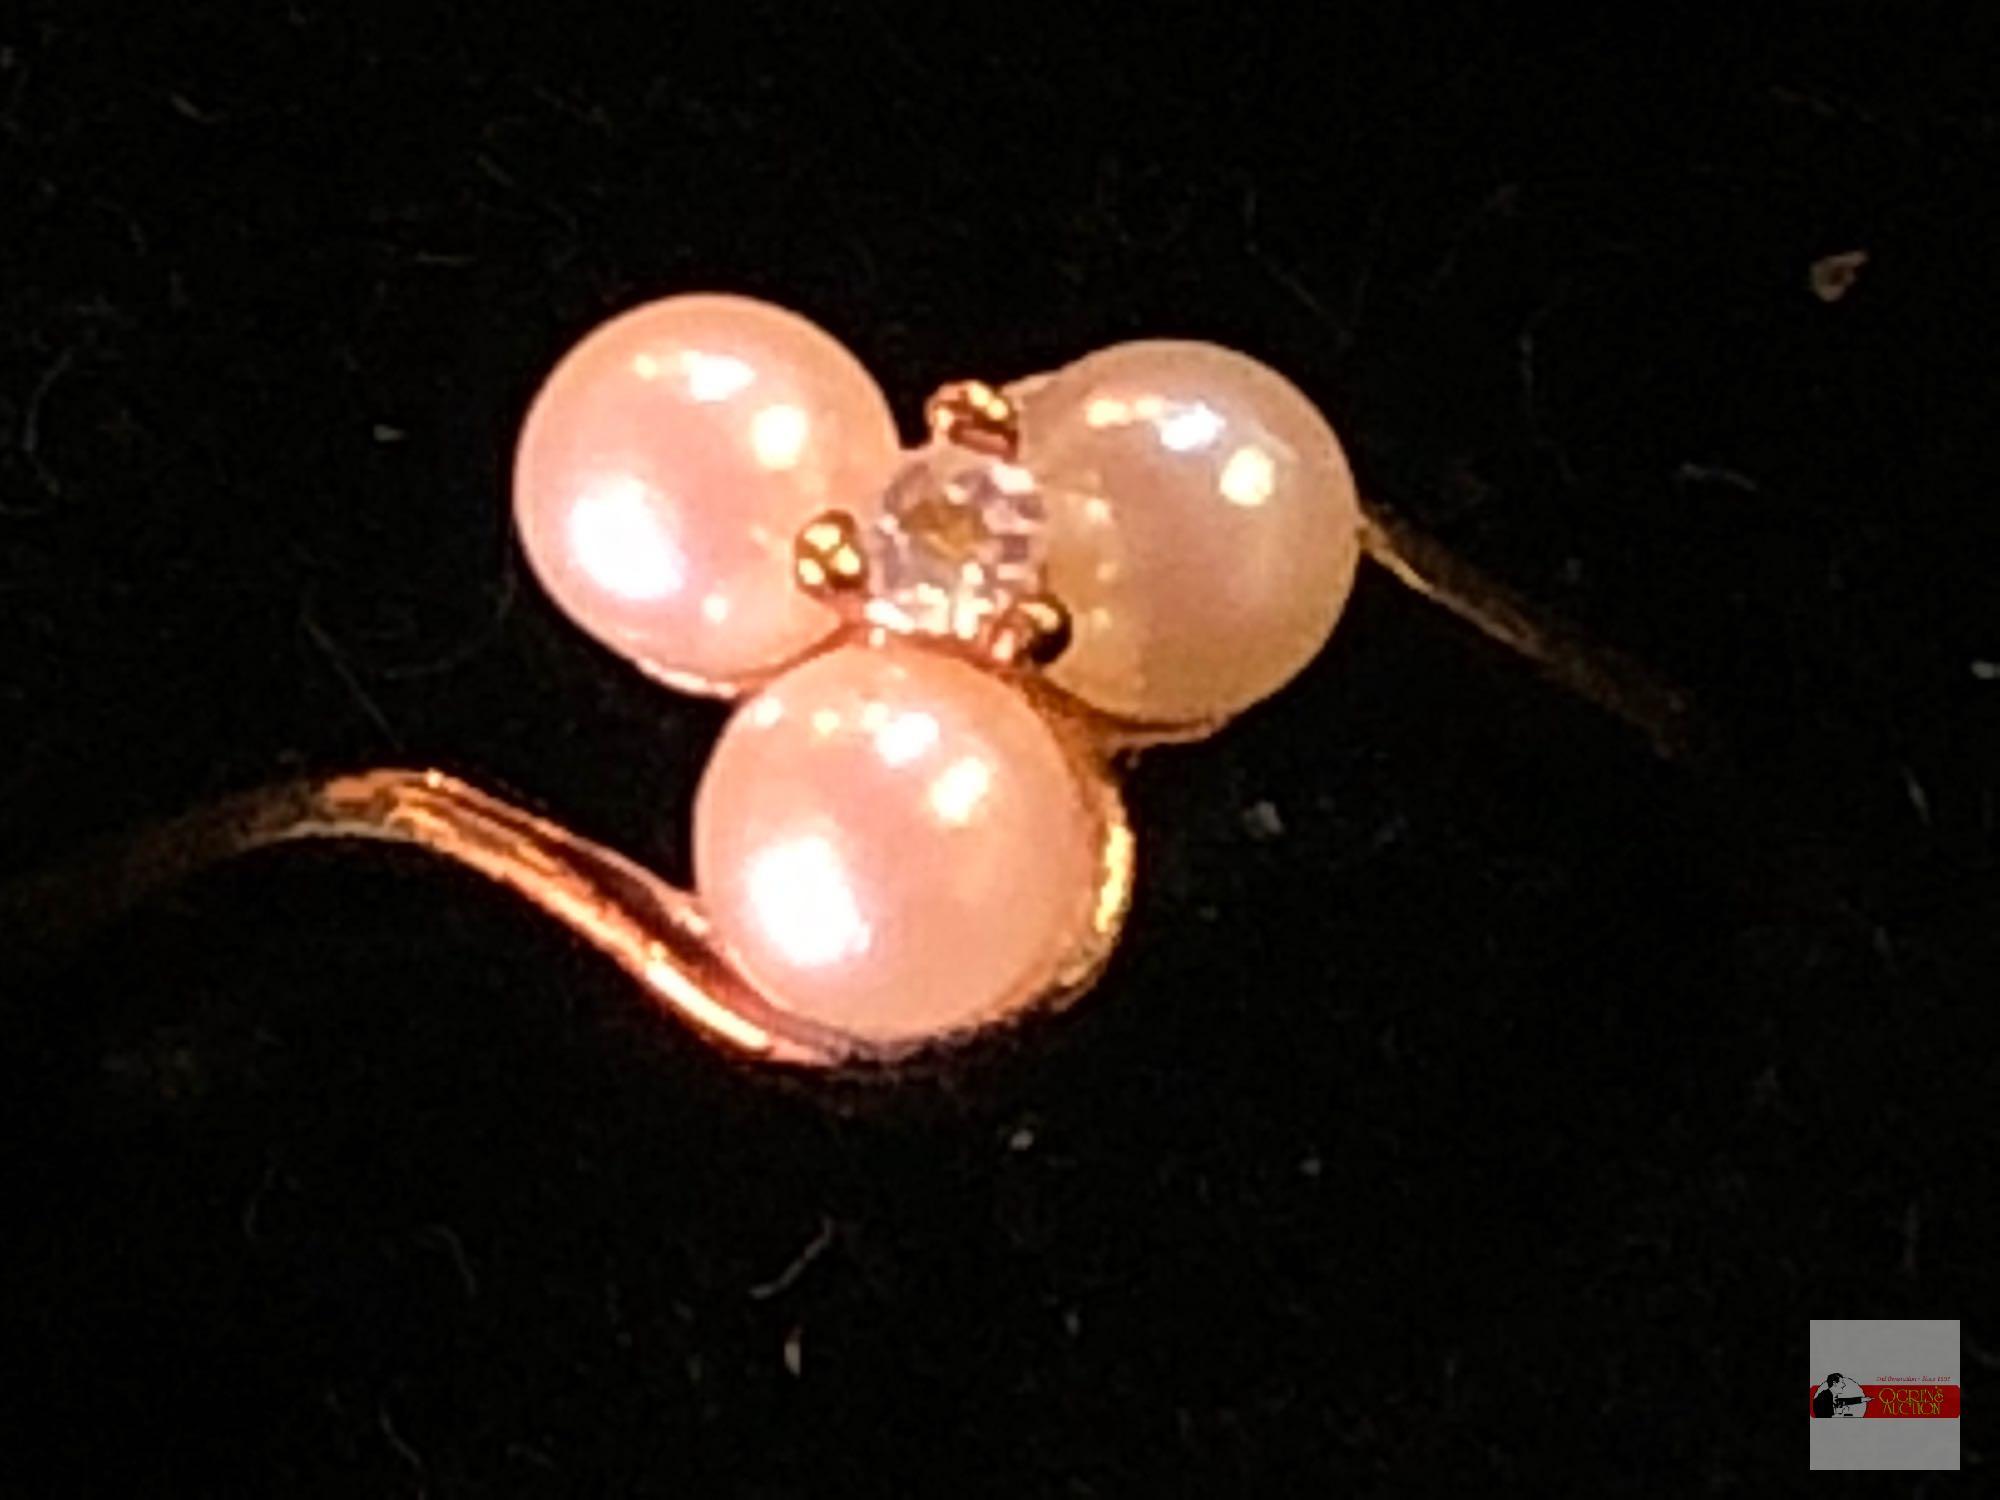 Jewelry - Ring - triple cluster pearls with clear stone center